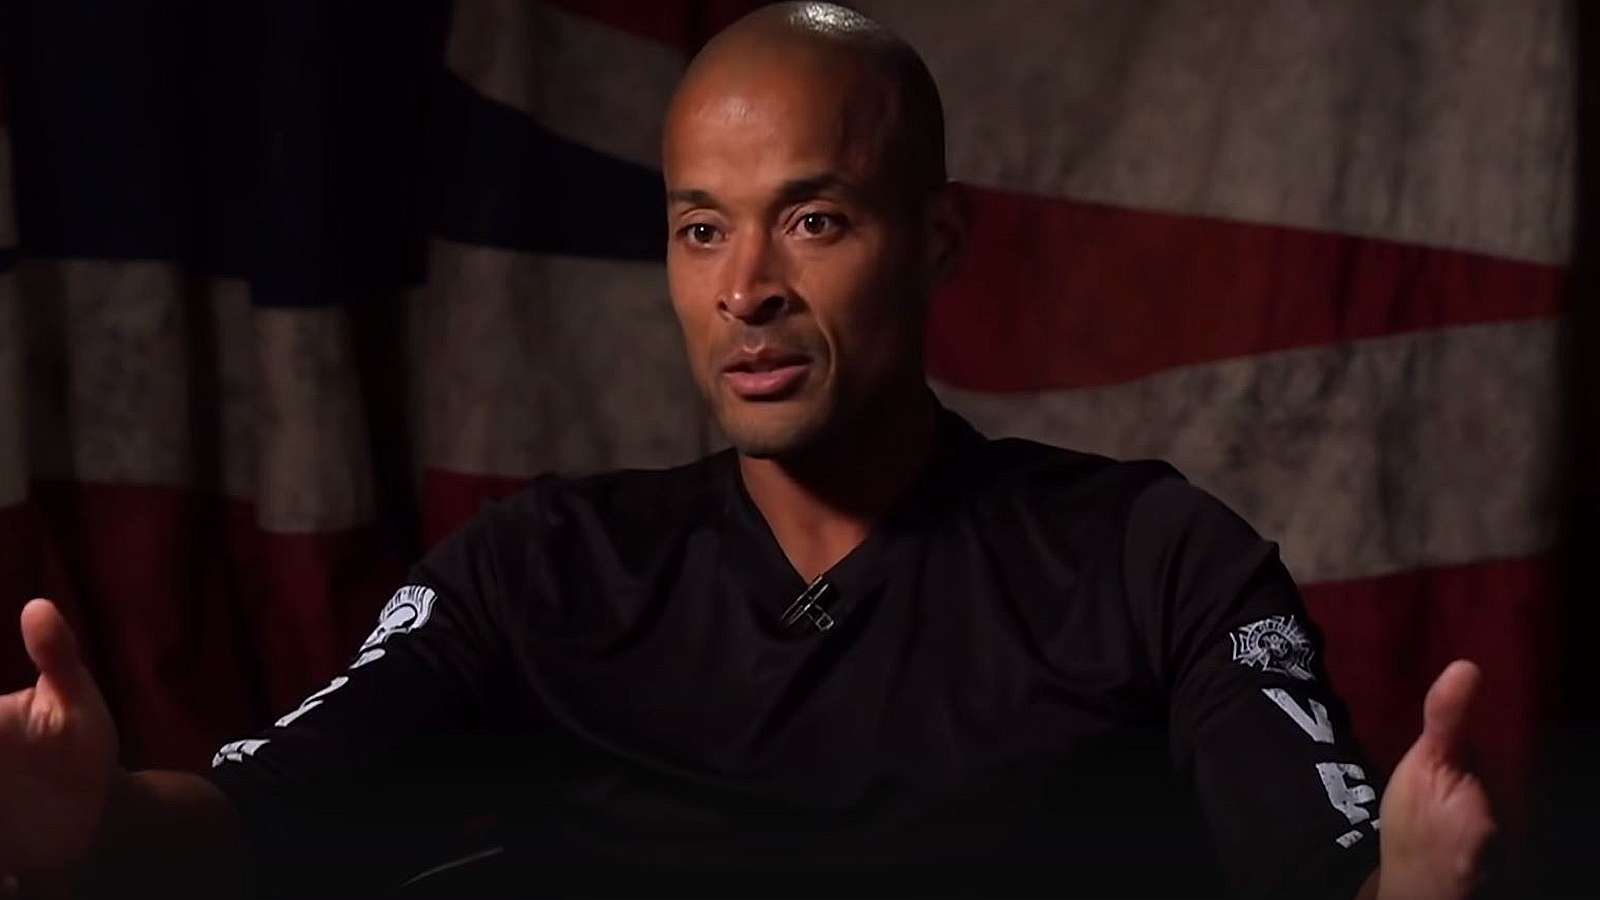 David Goggins speaks to Motivation Madness in an interview.